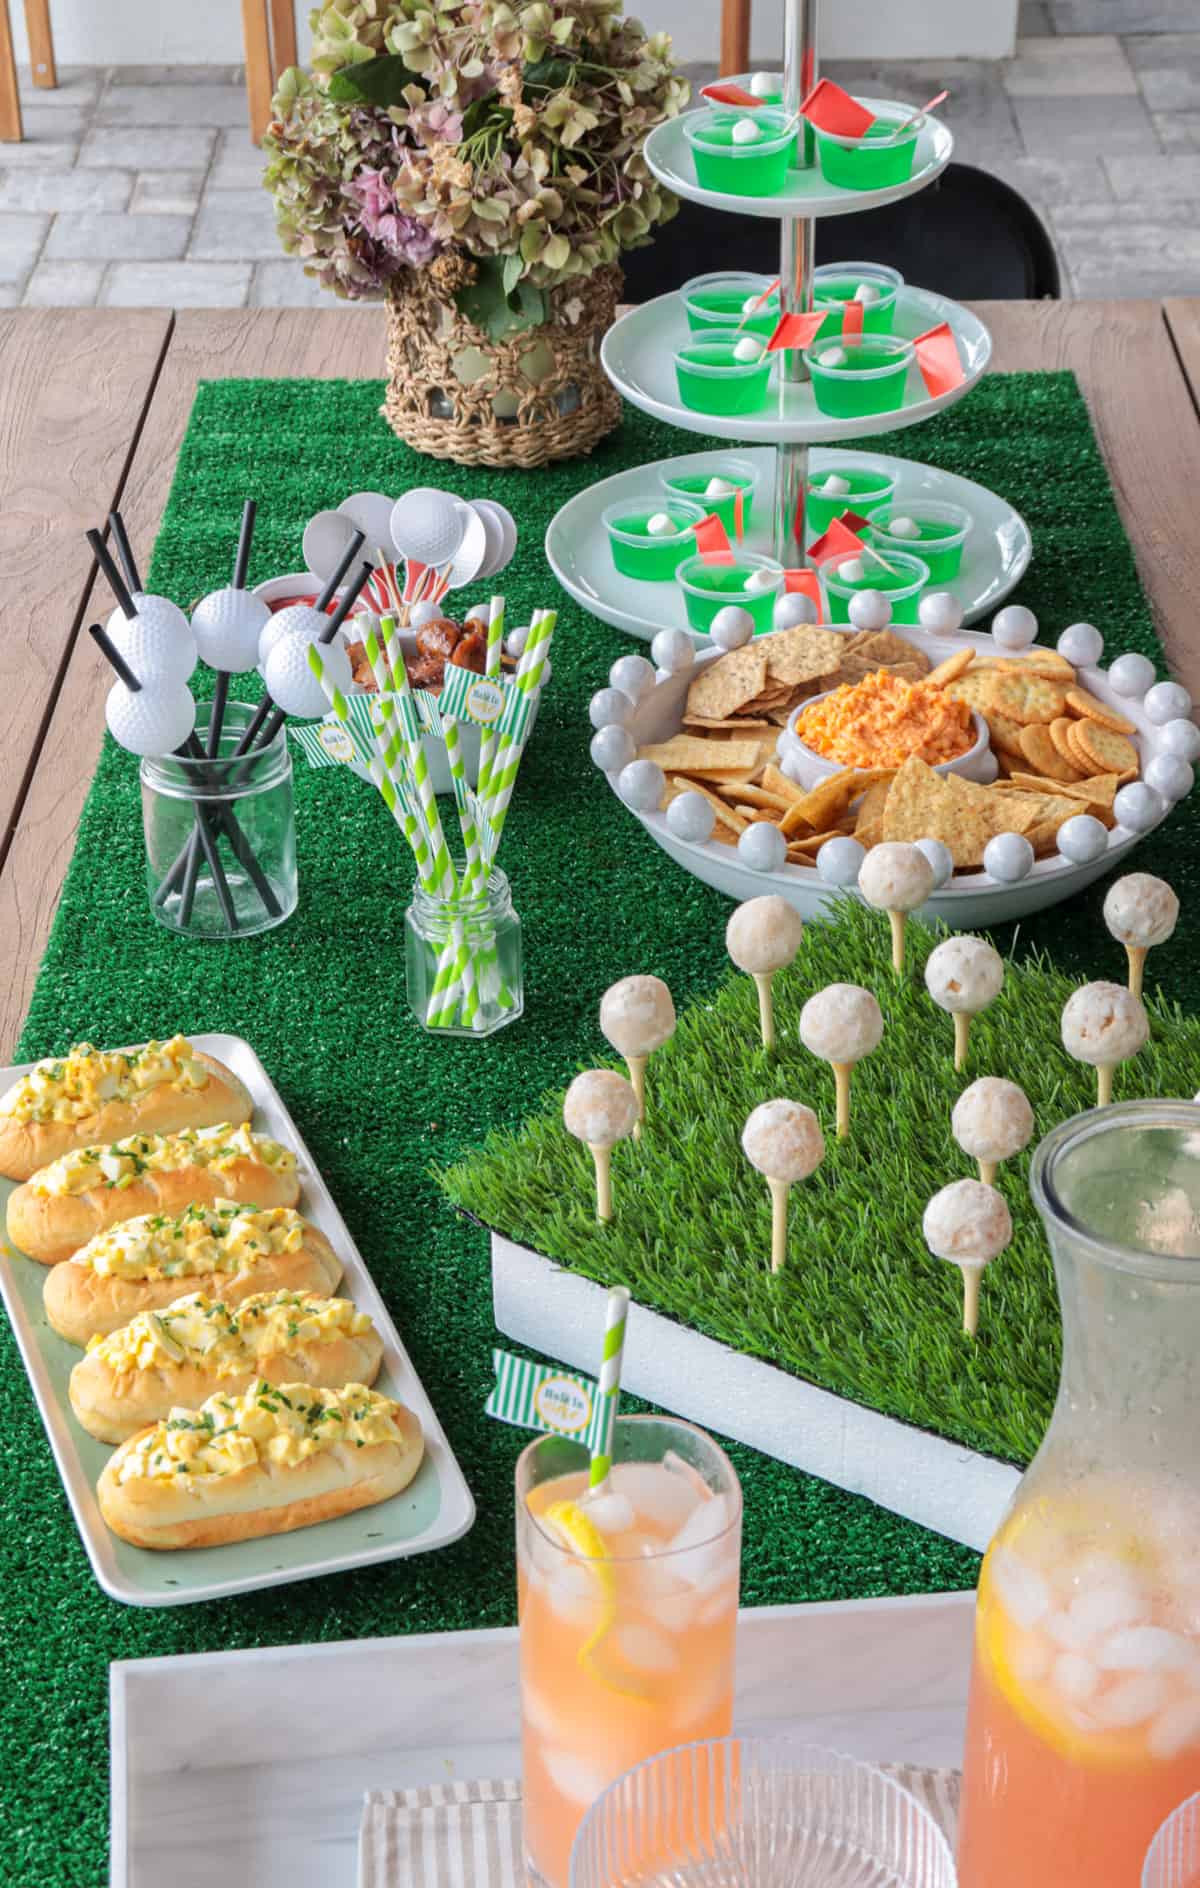 Masters party table with food and drinks.